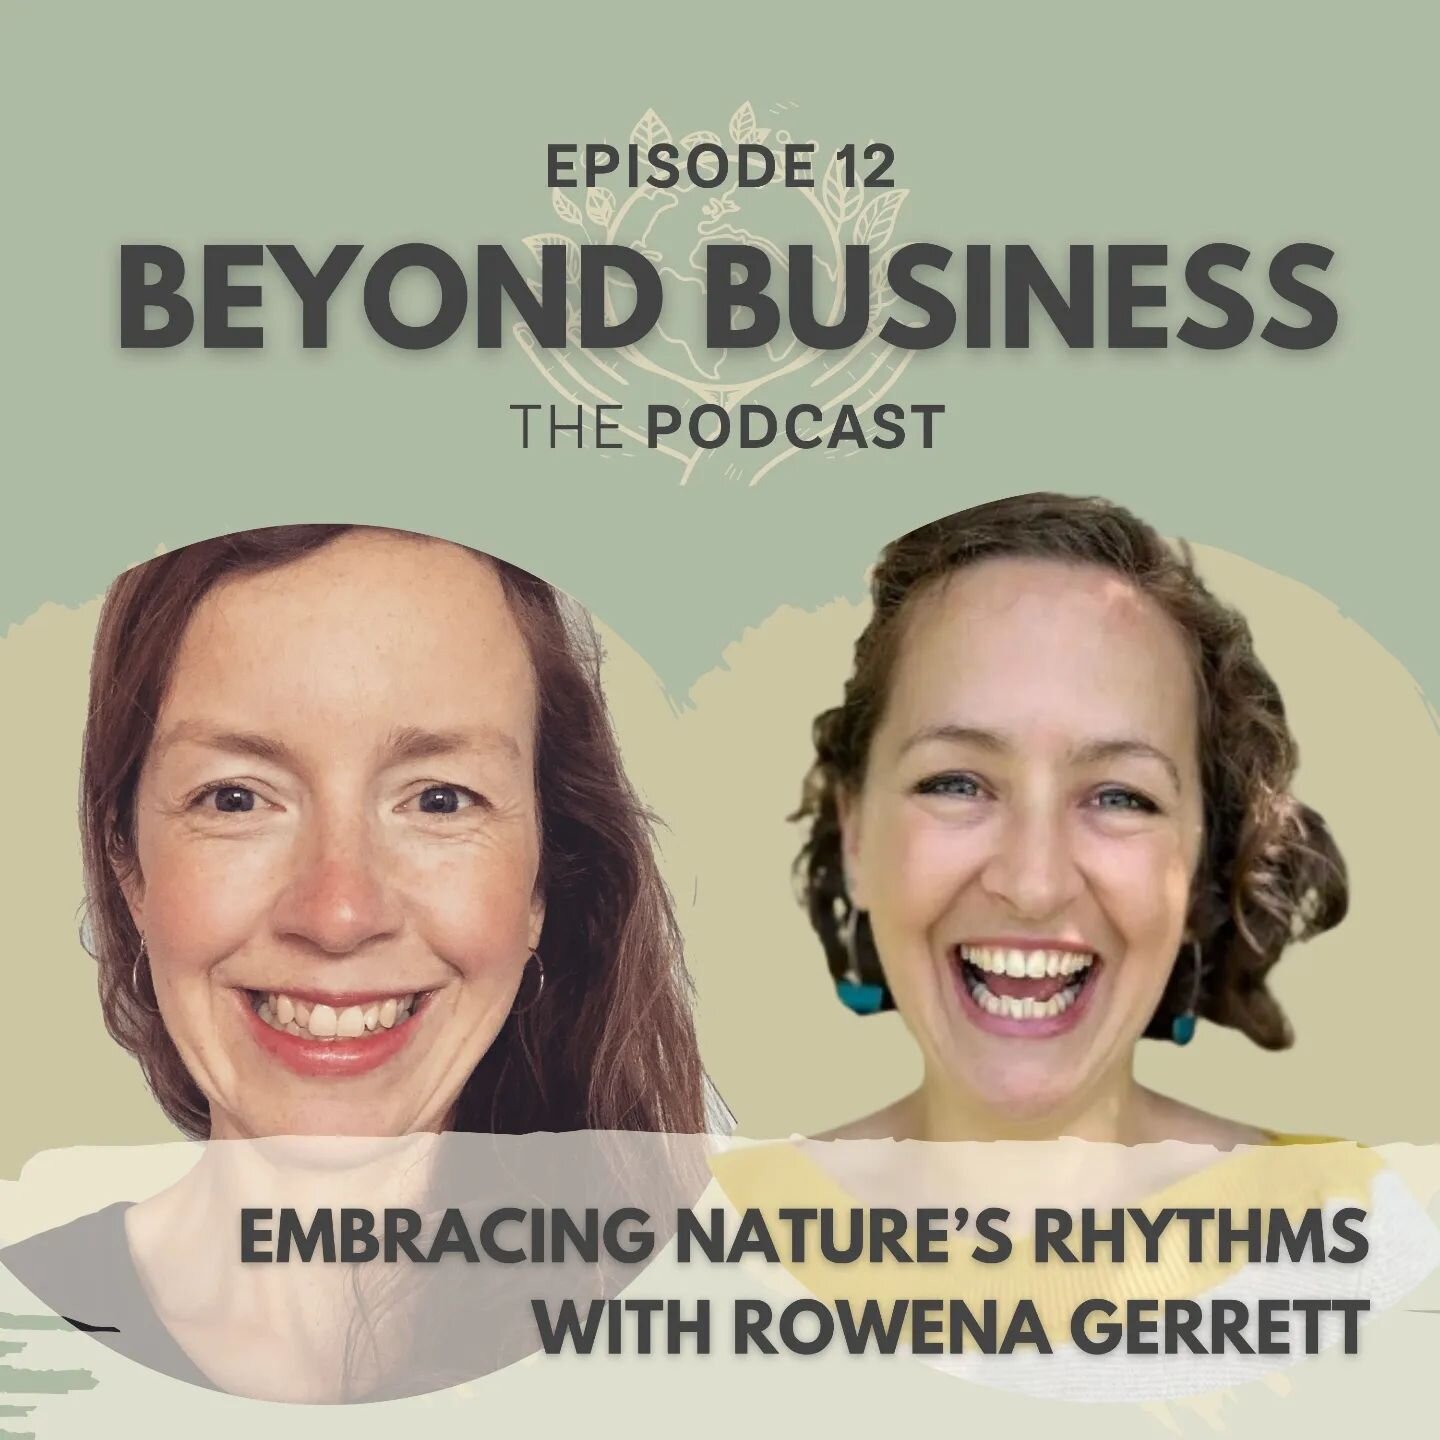 Join @beyond.business.collective and me as we discuss embracing nature's rhythms, our relationship with rest (not a reward!), building alternative narratives around productivity, and more...

Thank you so much for the chance to explore with you, Debb